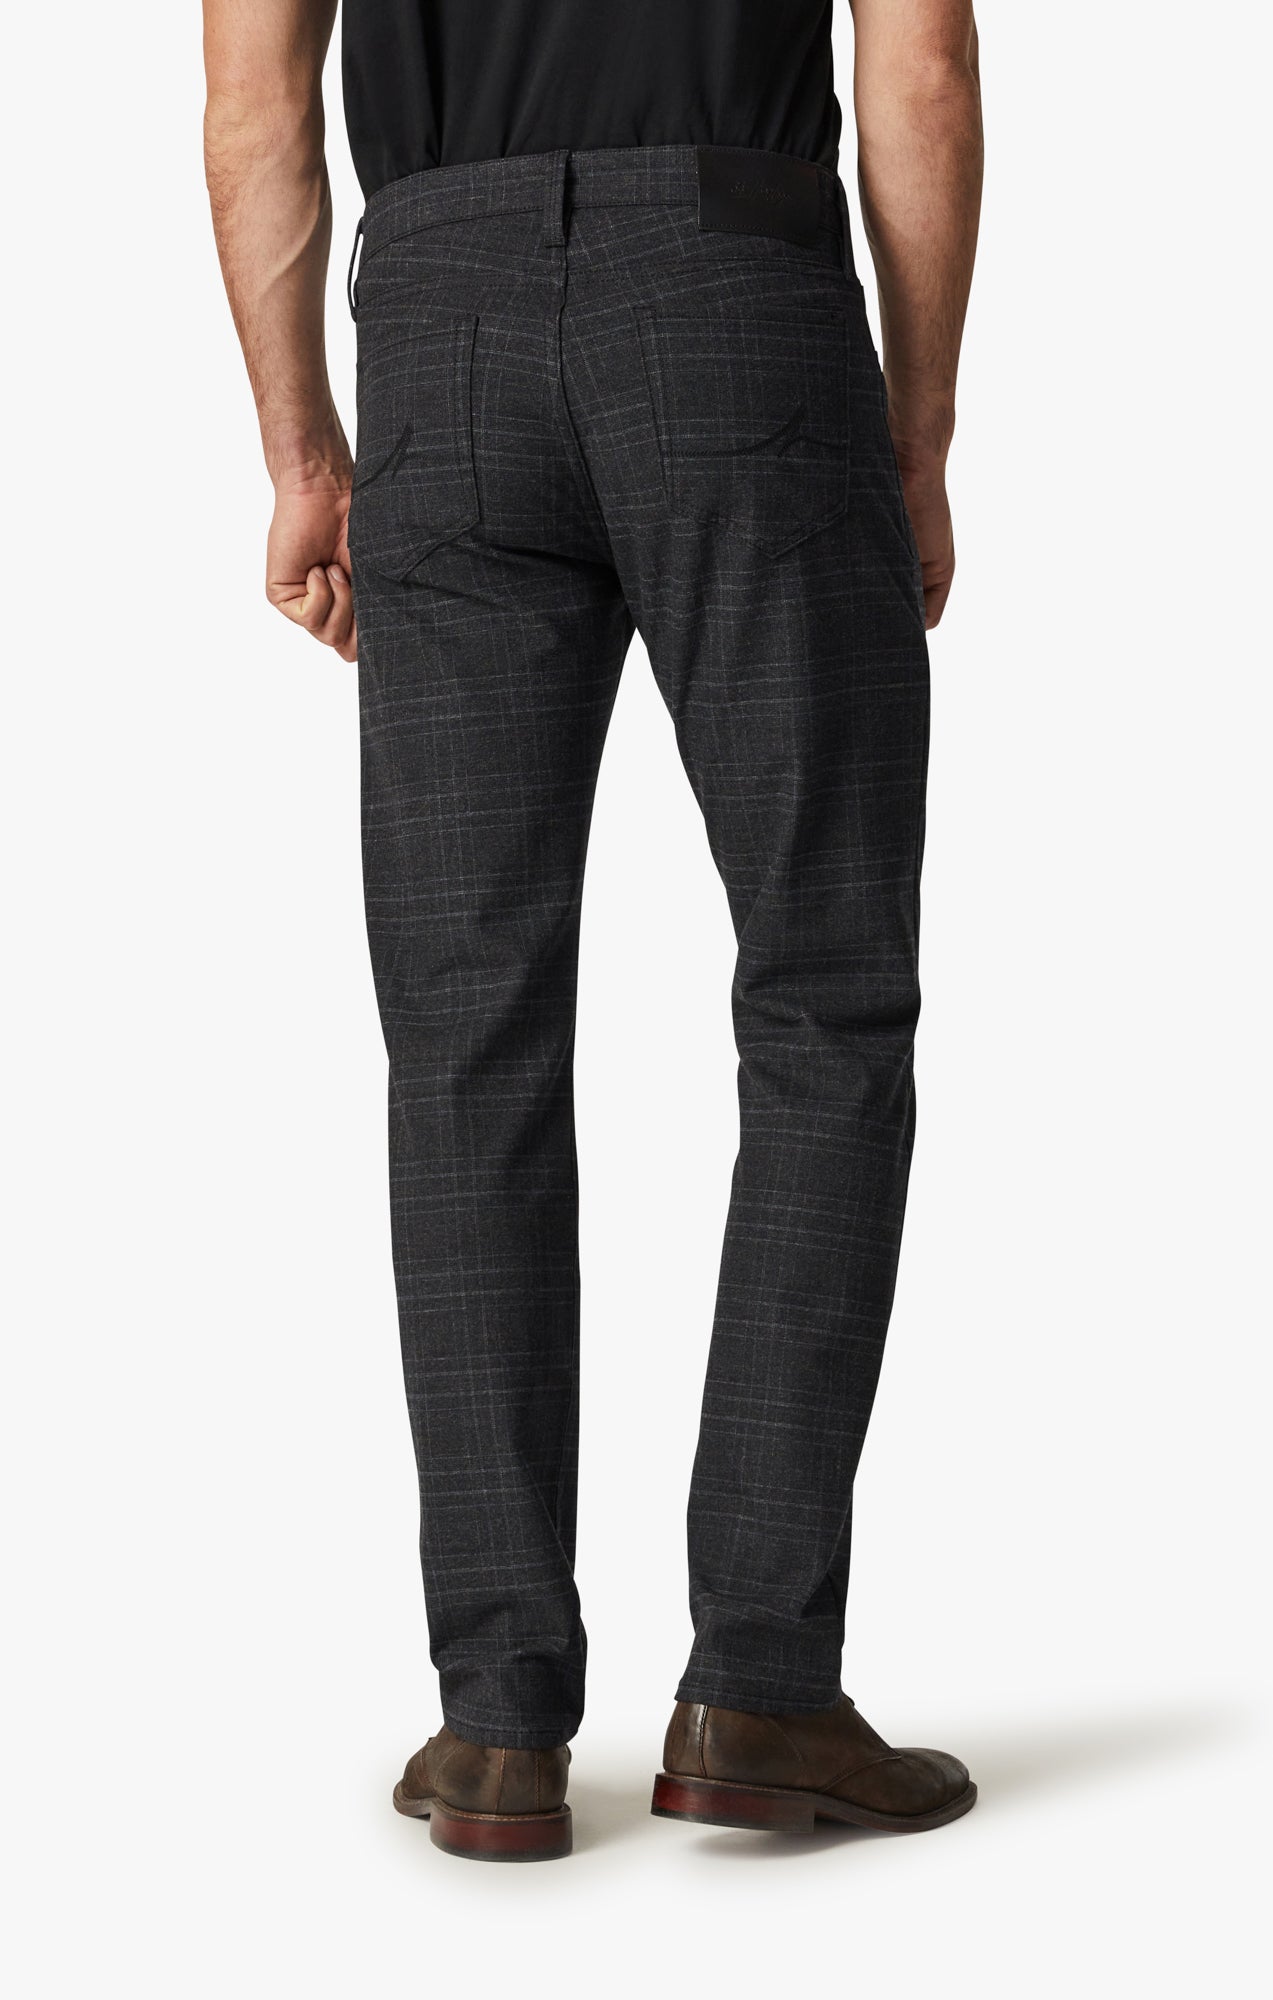 Courage Straight Leg Pants In Grey Checked Image 6